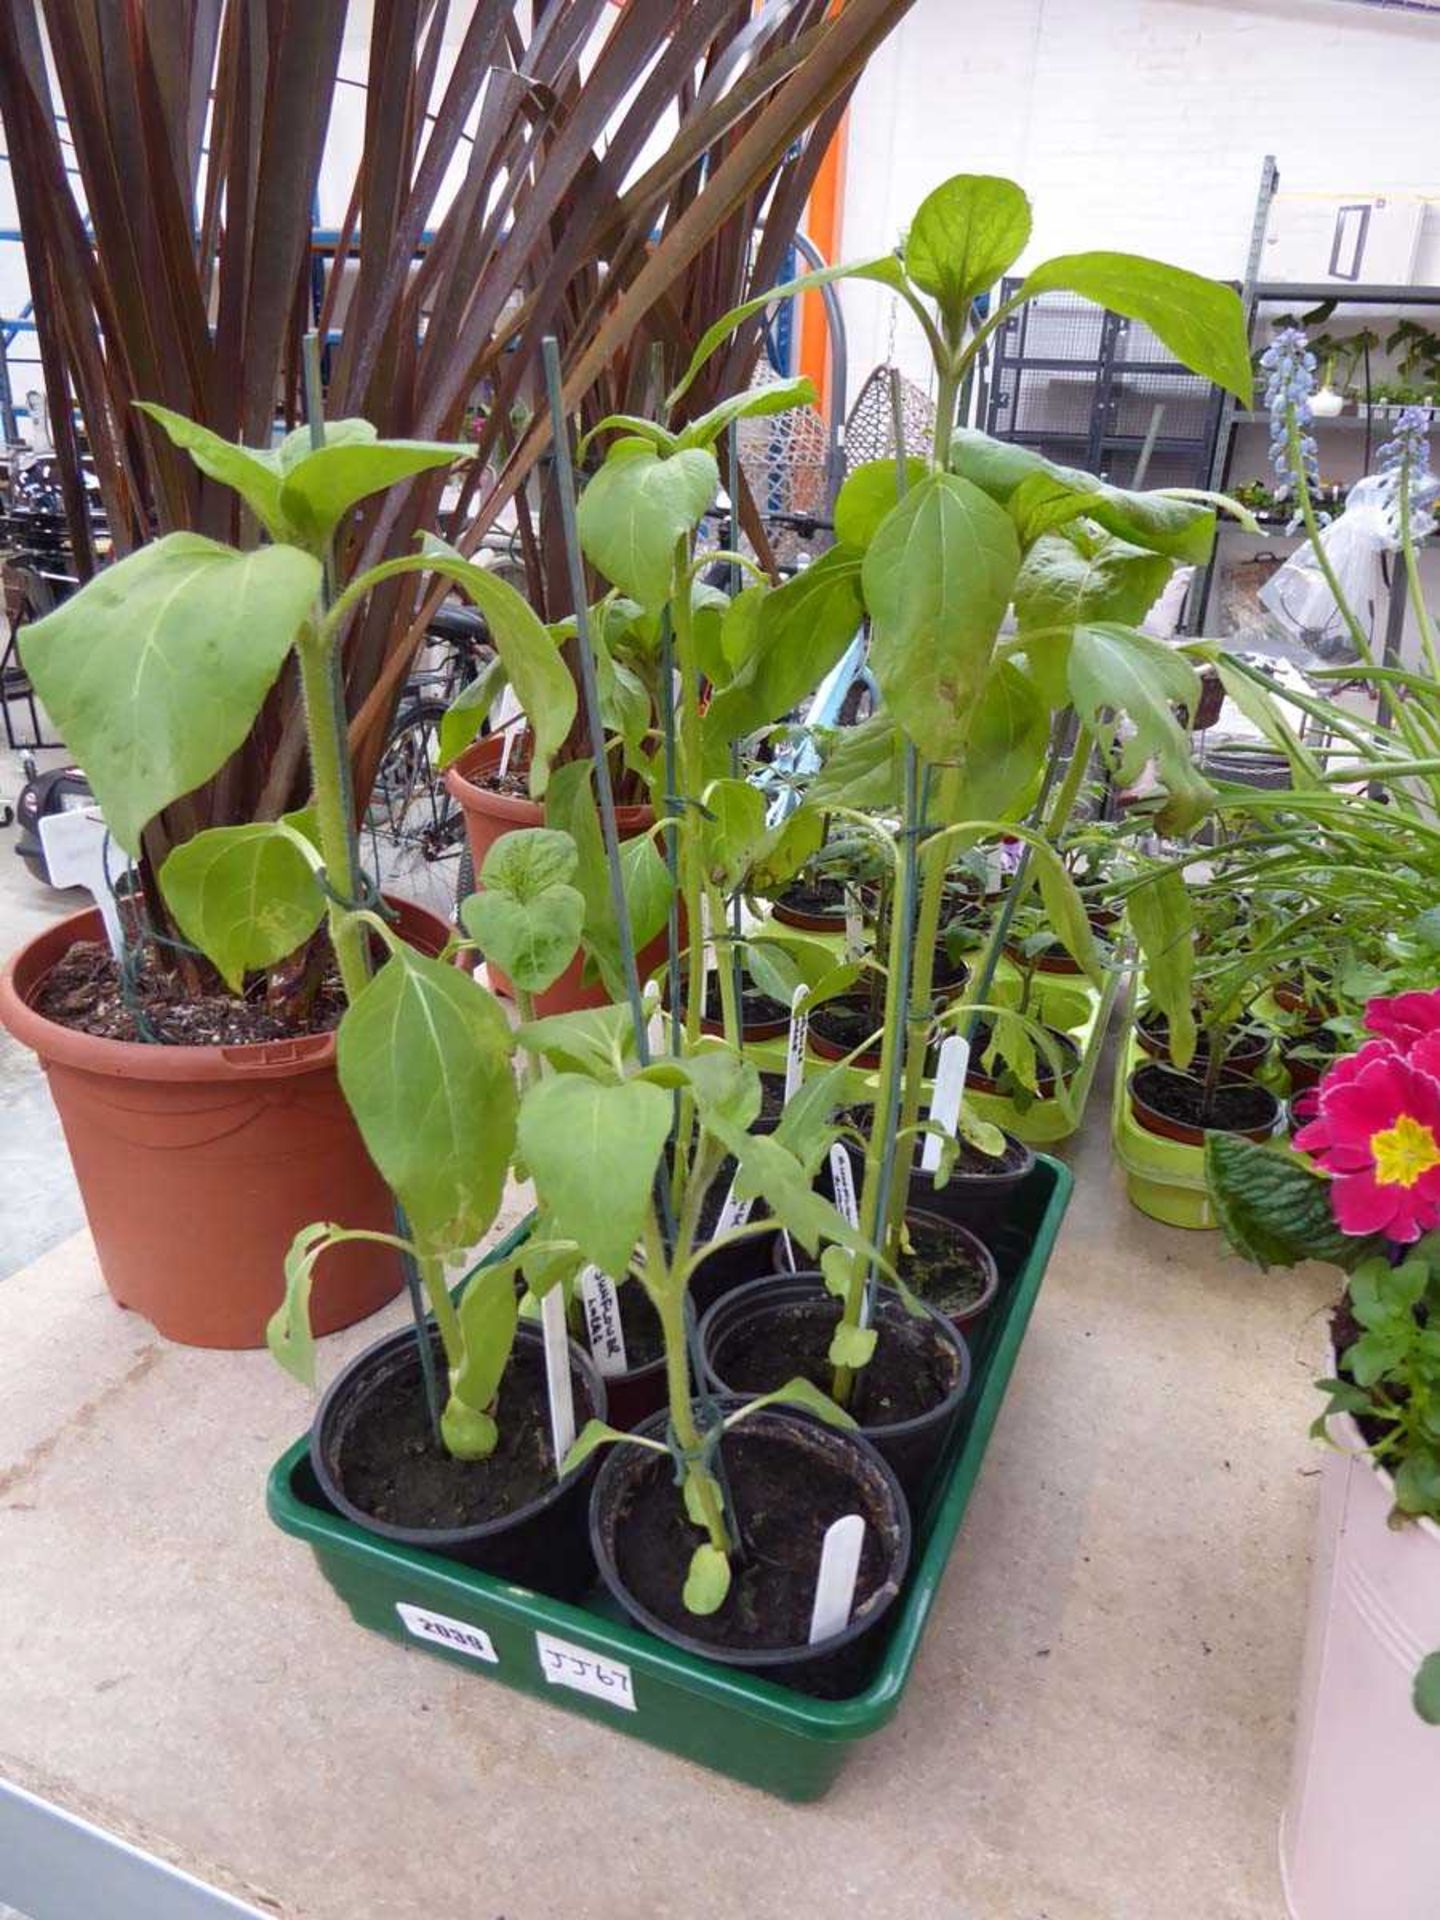 Tray containing 8 potted large sunflowers